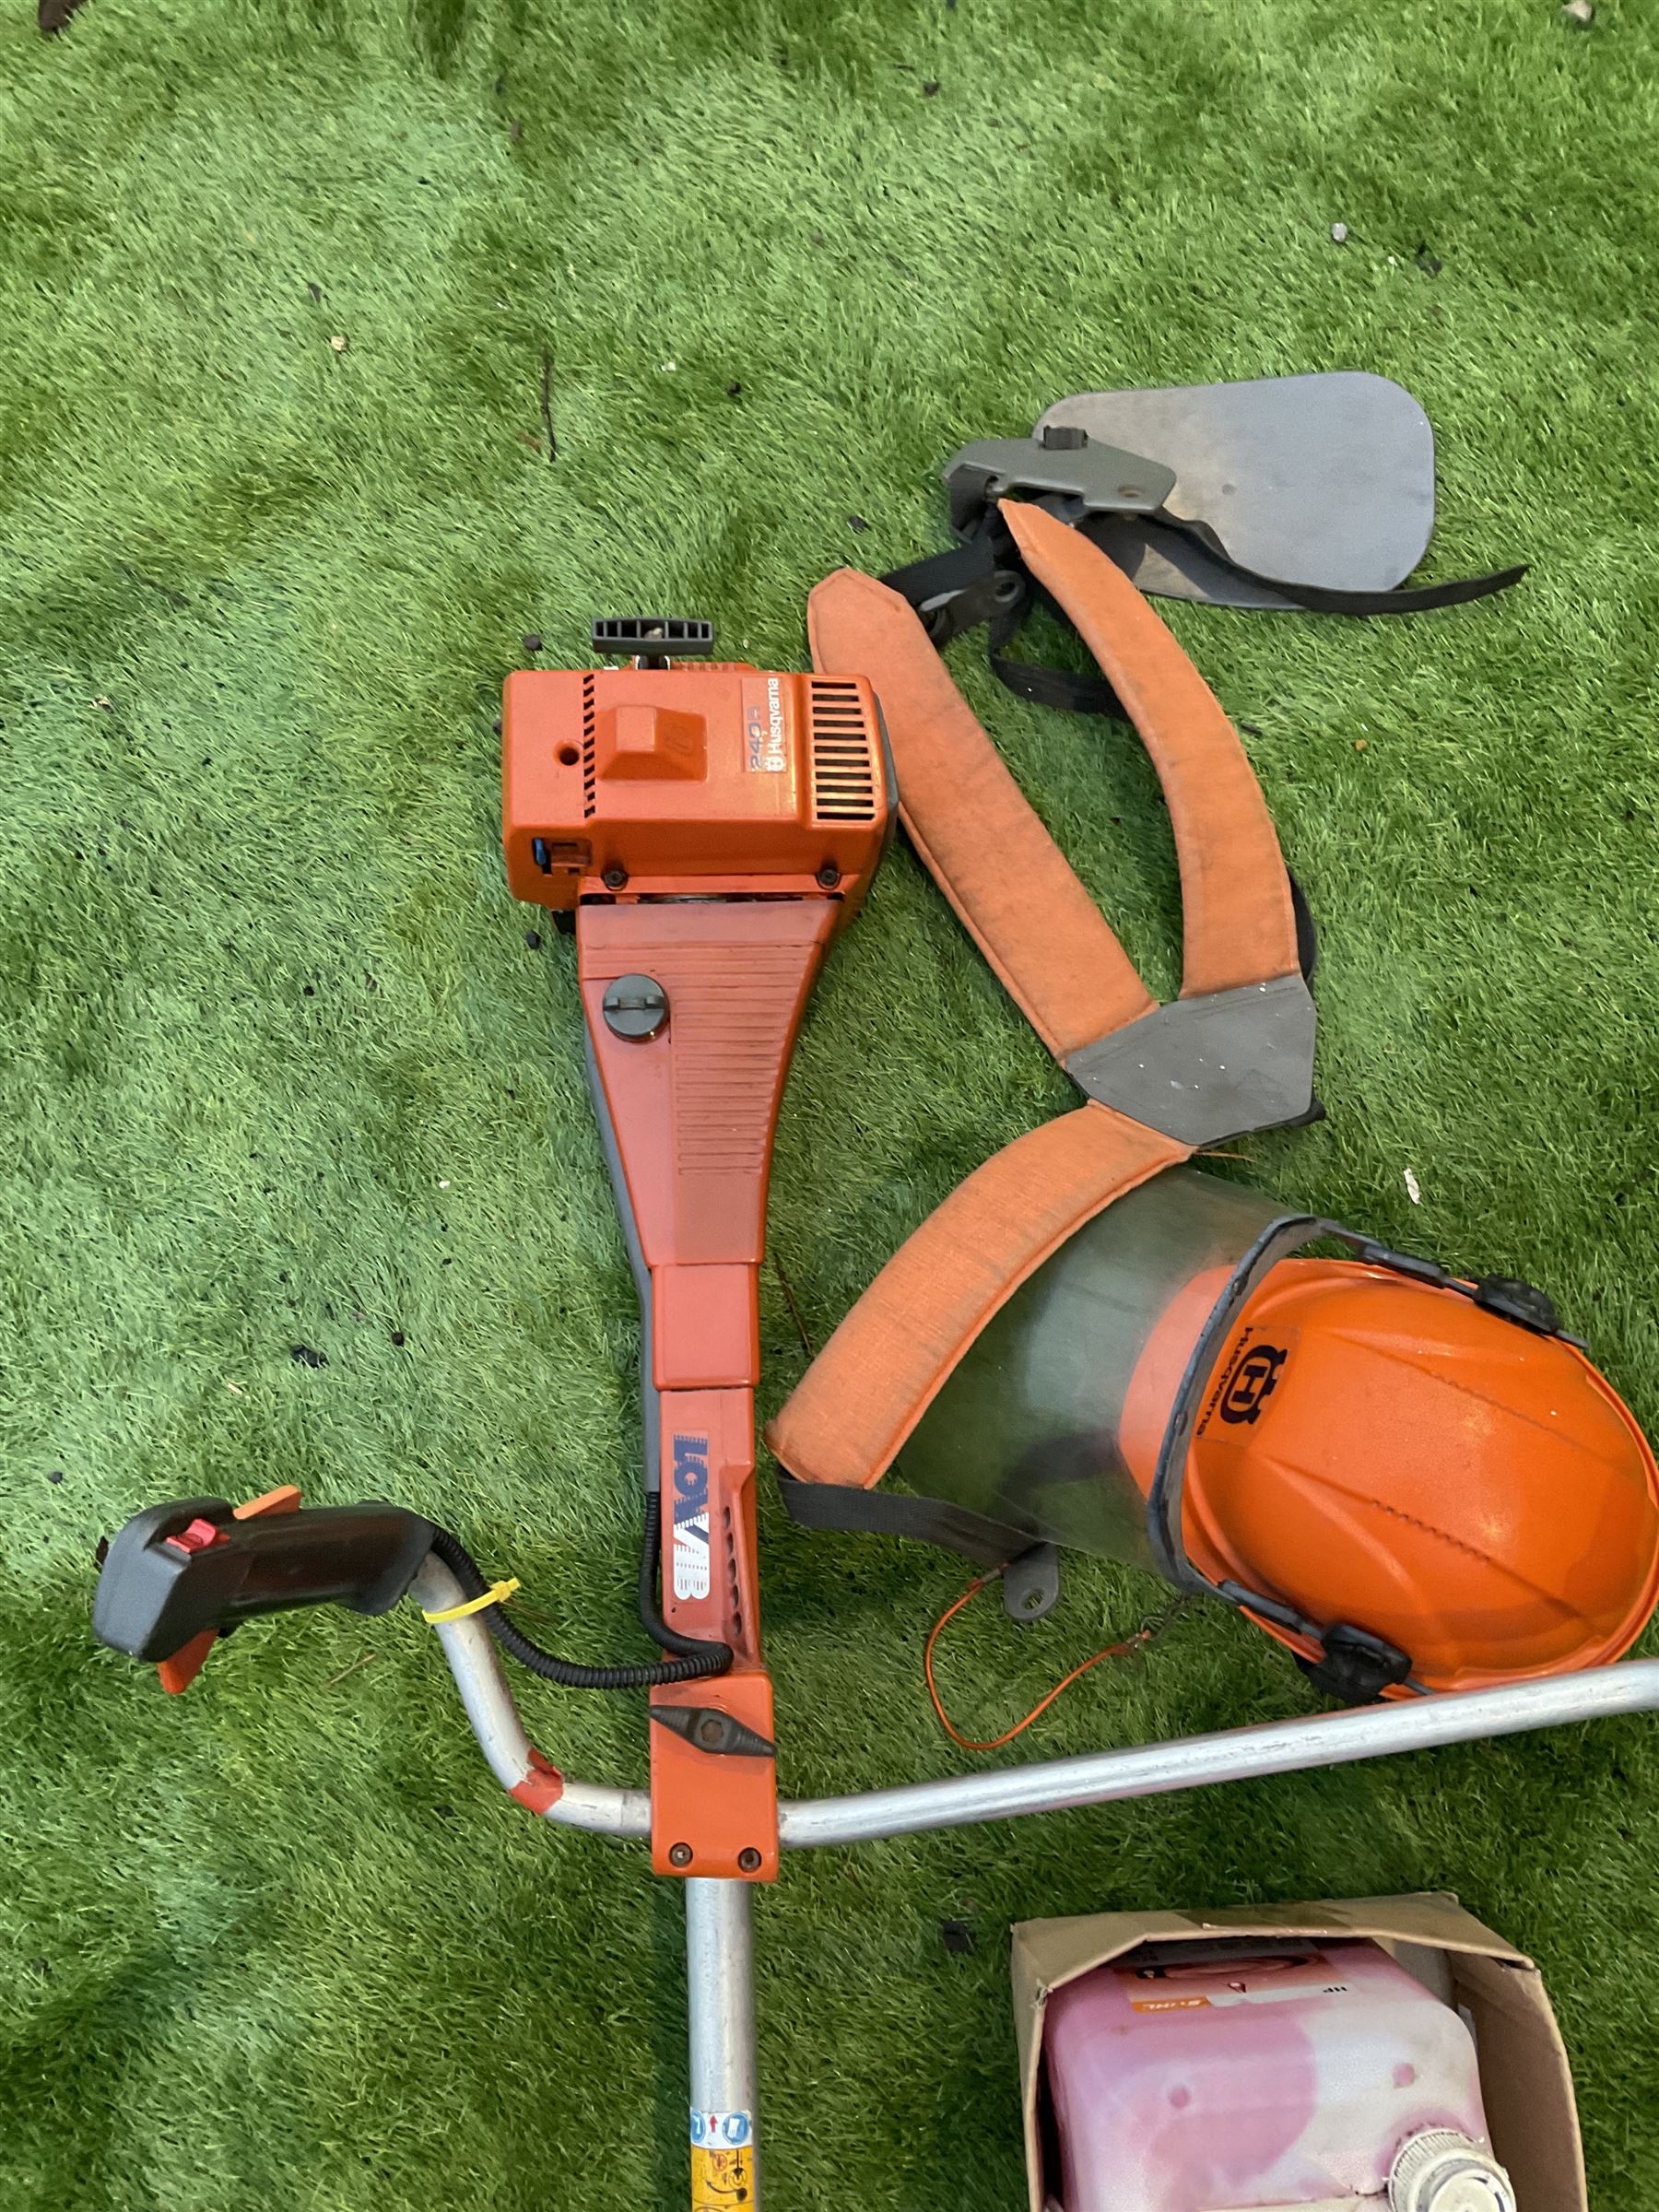 Husqvarna 240 R petrol strimmer with harness and helmet - Image 3 of 5